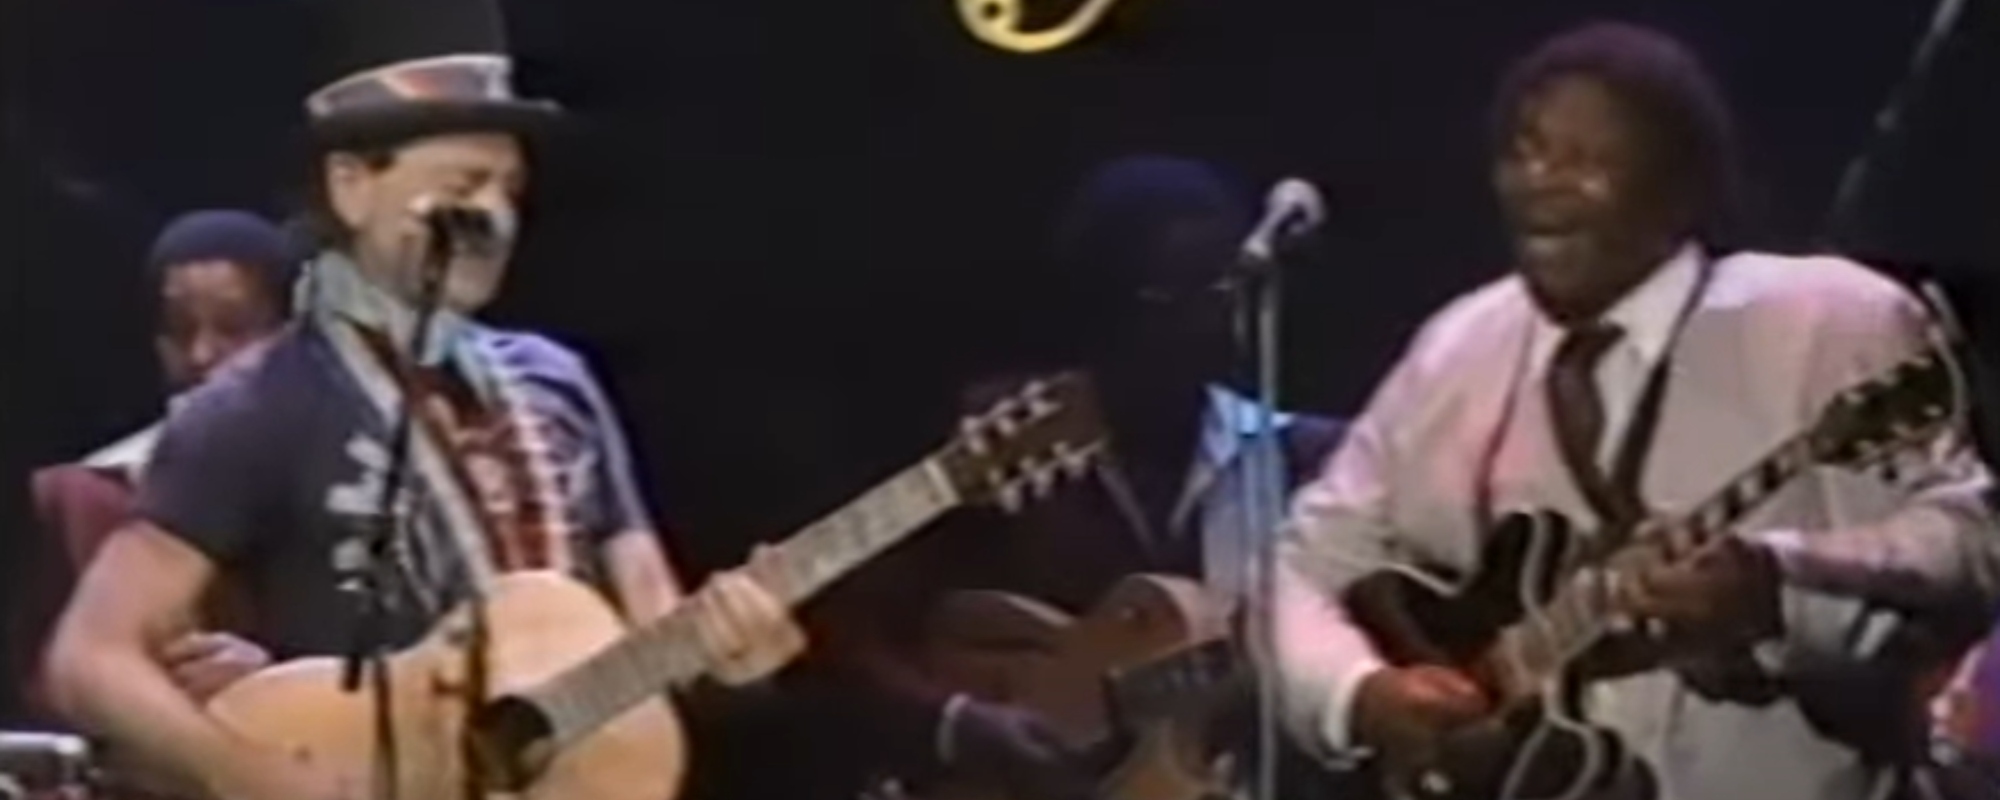 Willie Nelson’s Vintage “Night Life” Performance With B.B. King Has Fans in Their Feels: “My Soul Wants To Burst”